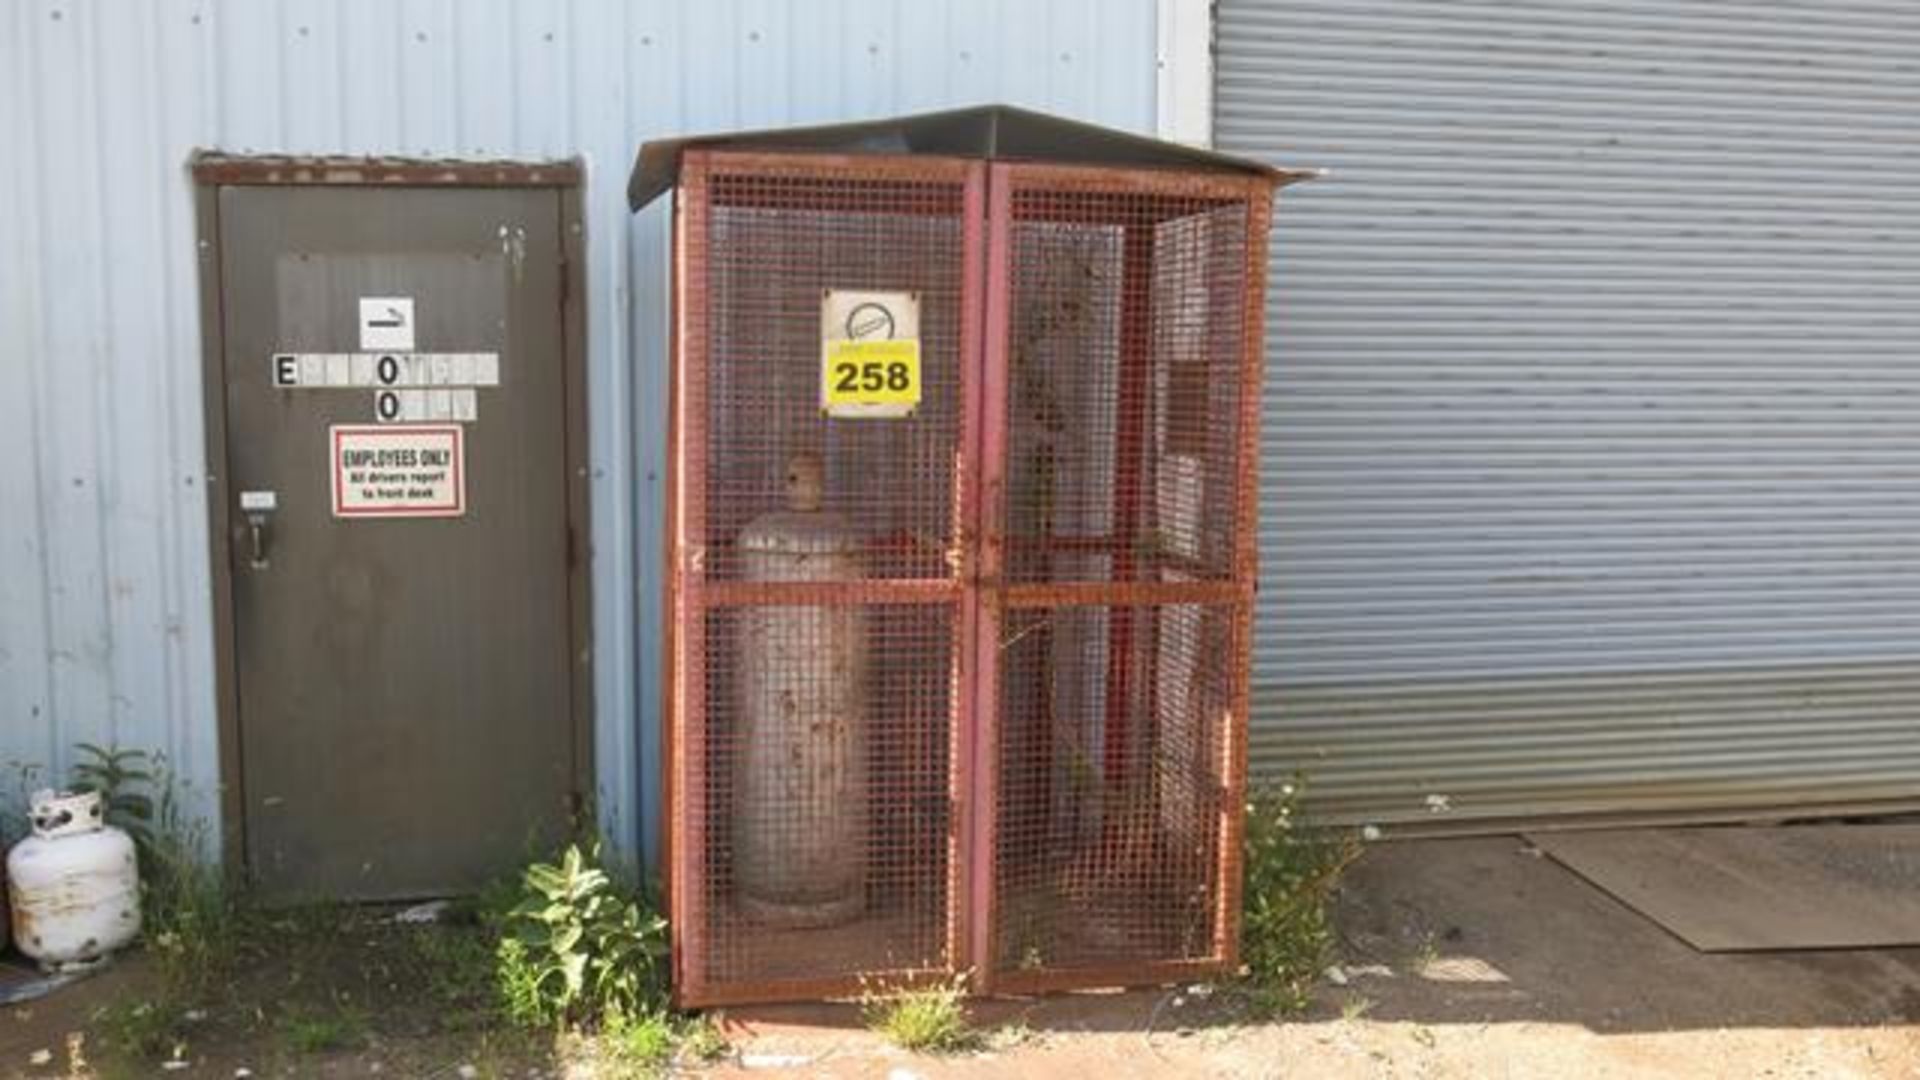 OUTDOOR STORAGE CAGE, 7' X 5' X 4' (CONTENTS NOT INCLUDED)